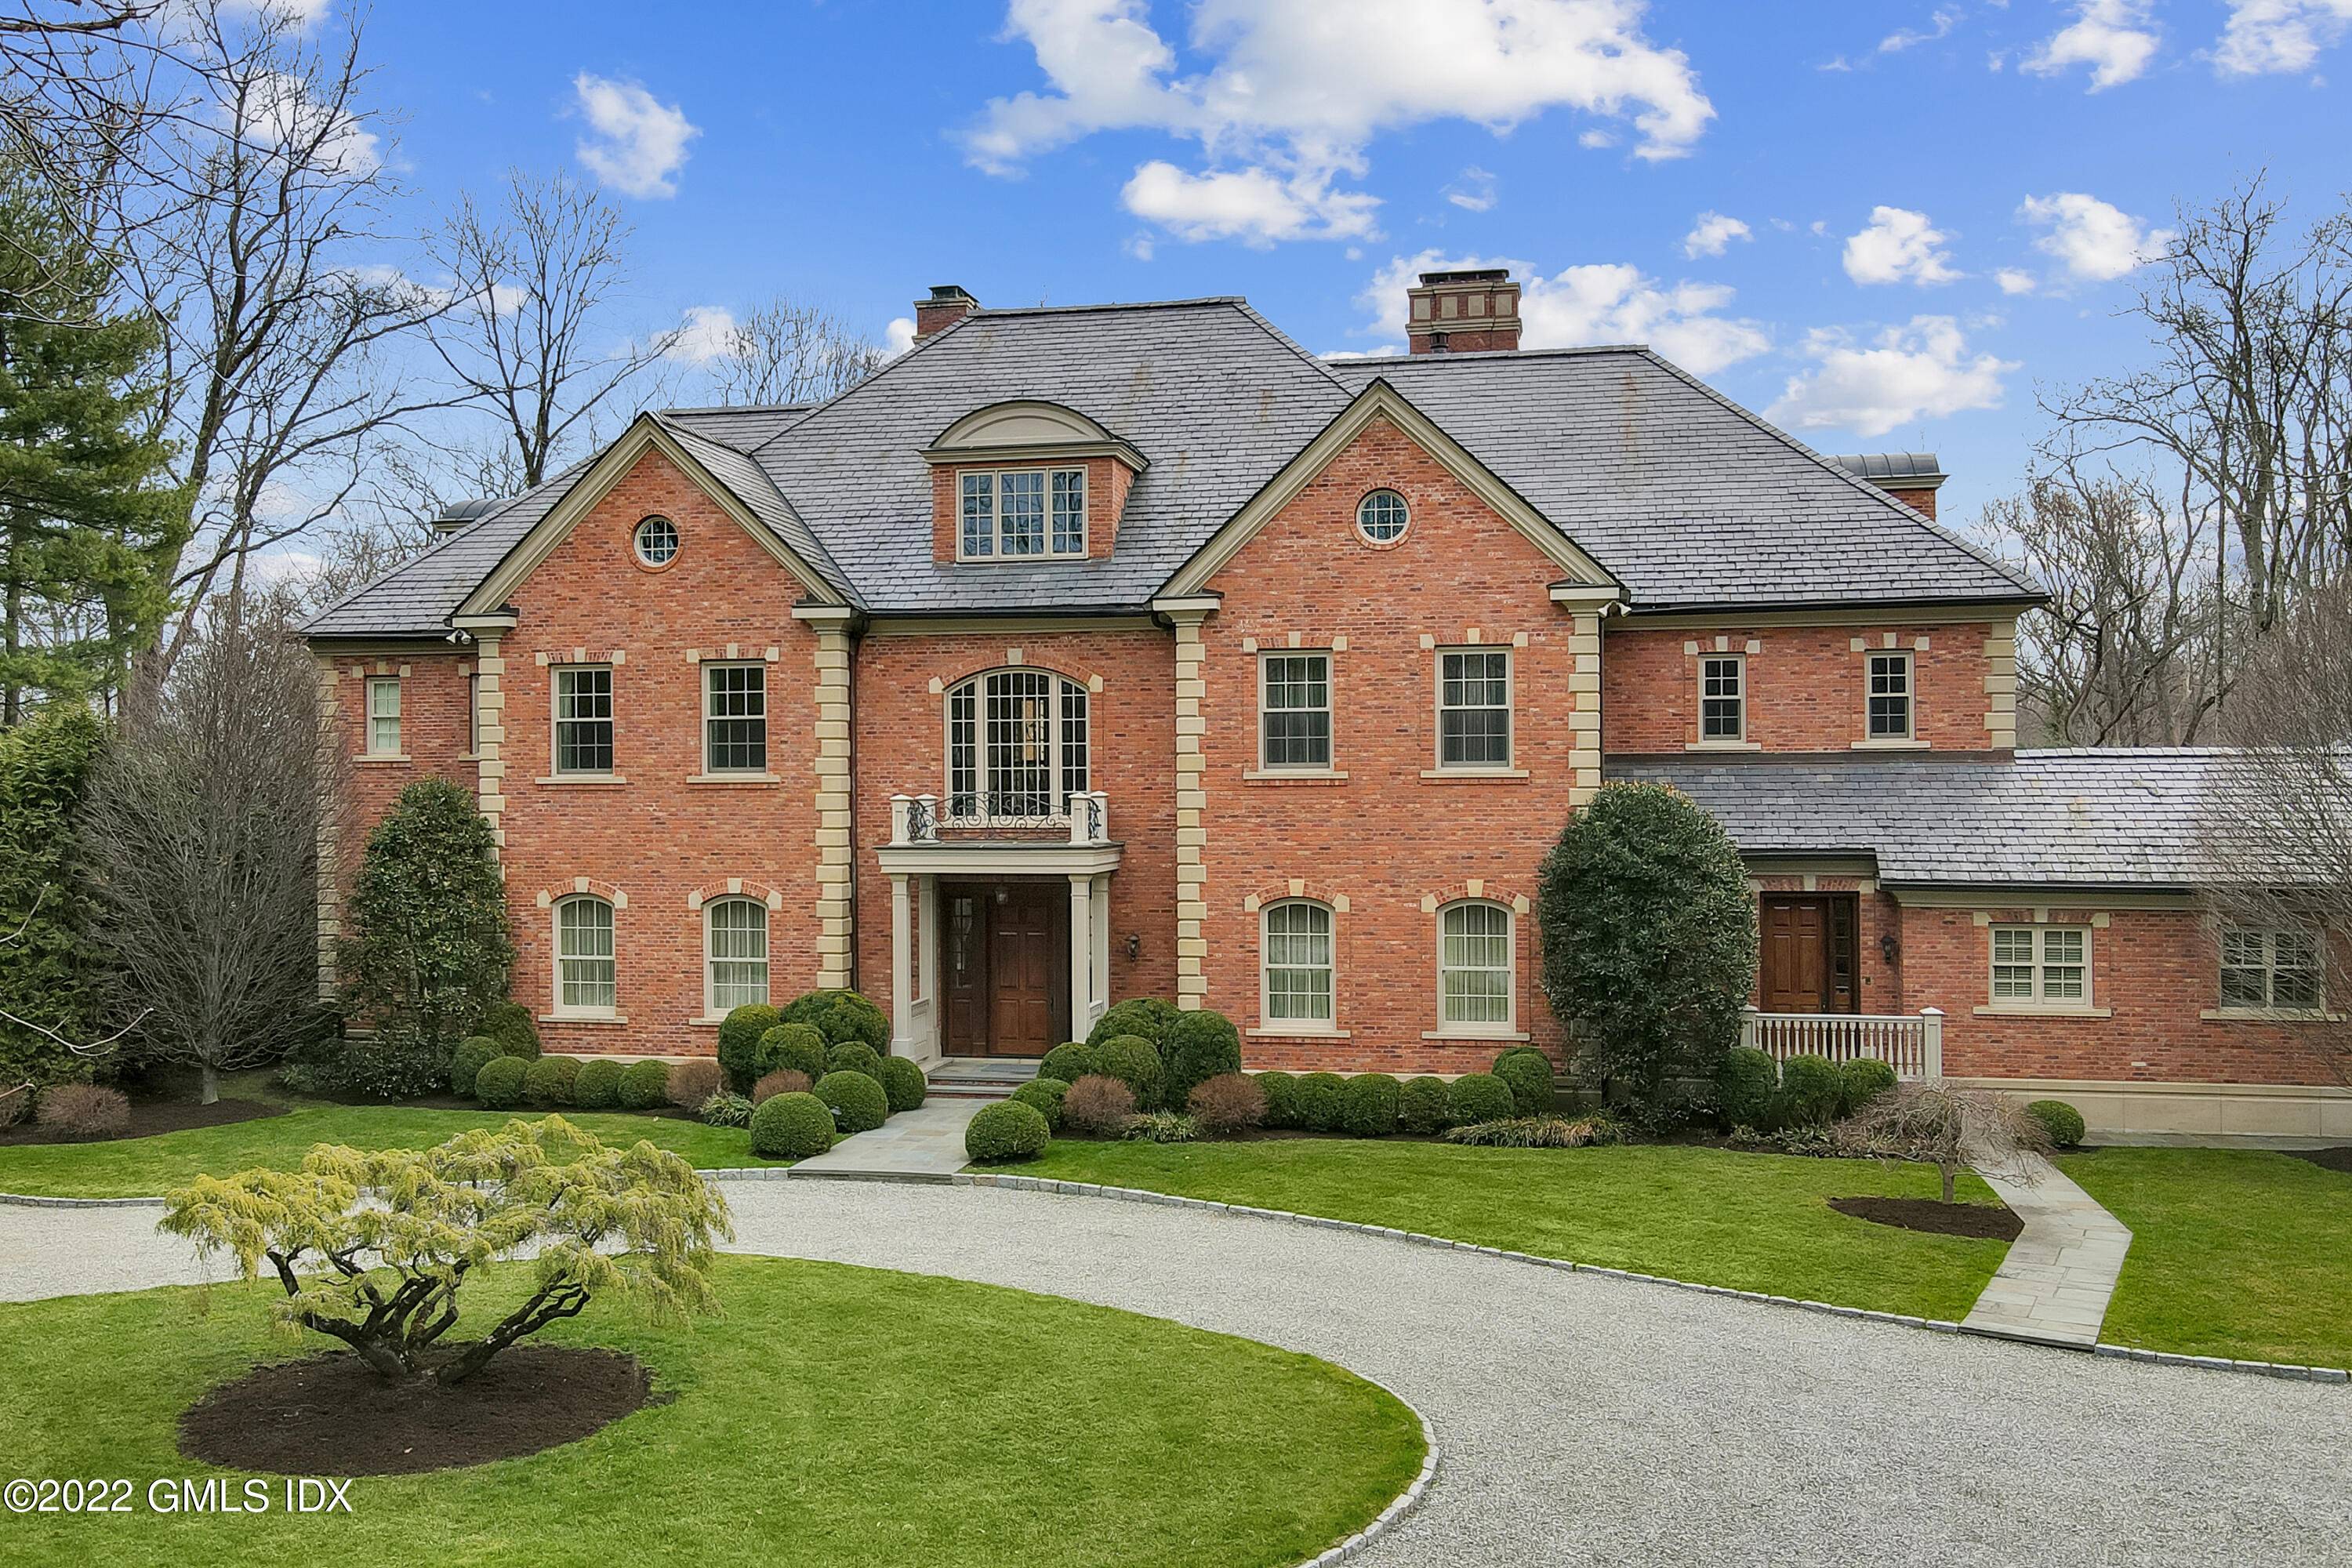 Custom built in 2010, this magnificent 7 bedroom stone manor is sited on over 2 flat acres, on one of the most coveted streets in Greenwich.